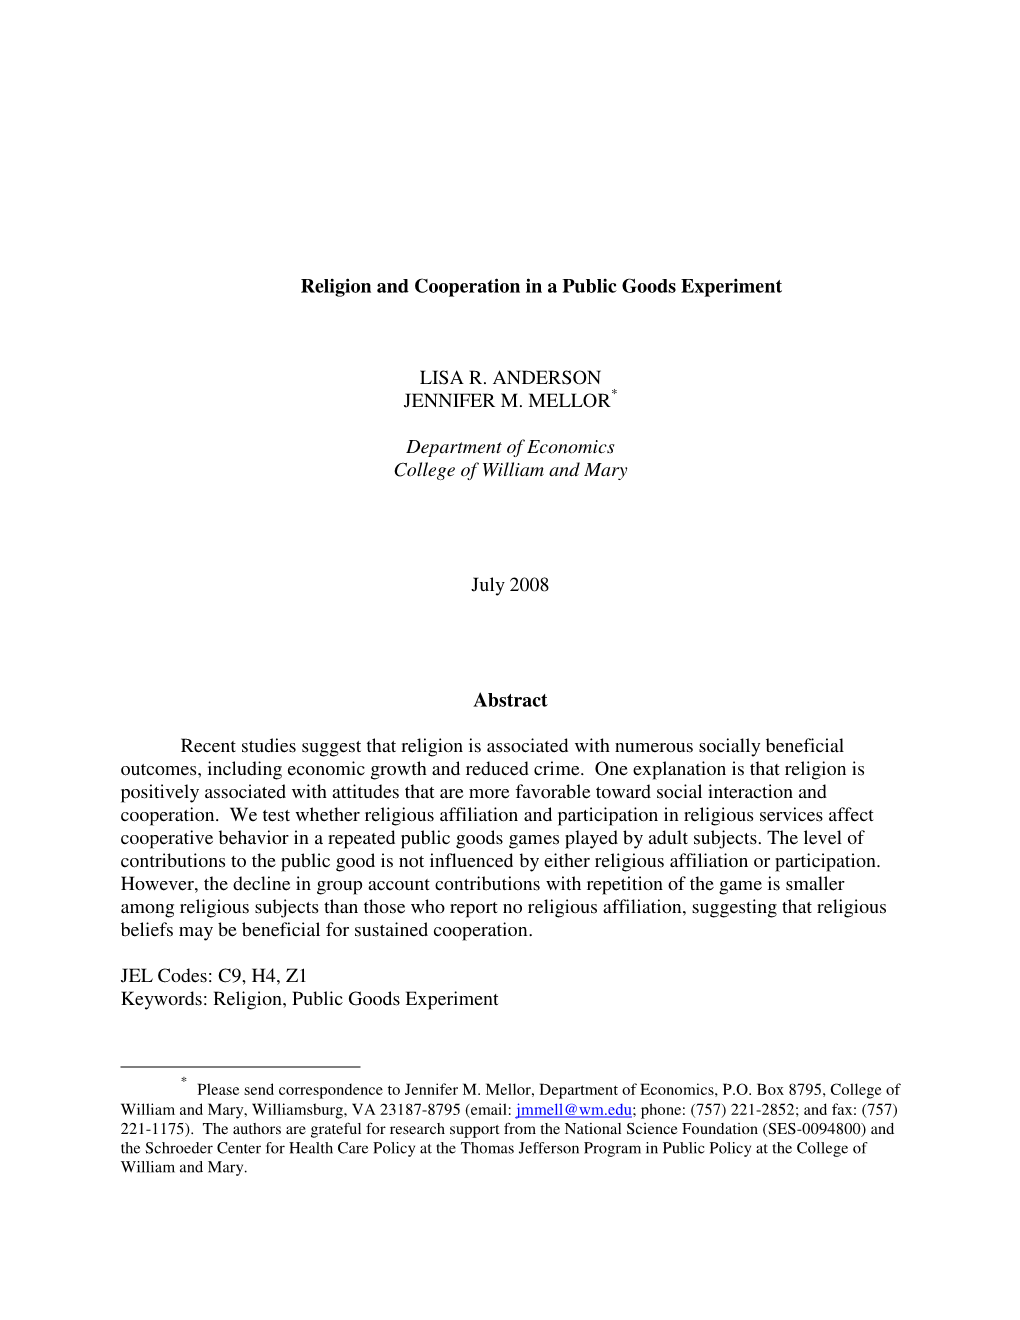 Religion and Cooperation in a Public Goods Experiment LISA R. ANDERSON JENNIFER M. MELLOR* Department of Economics College of Wi